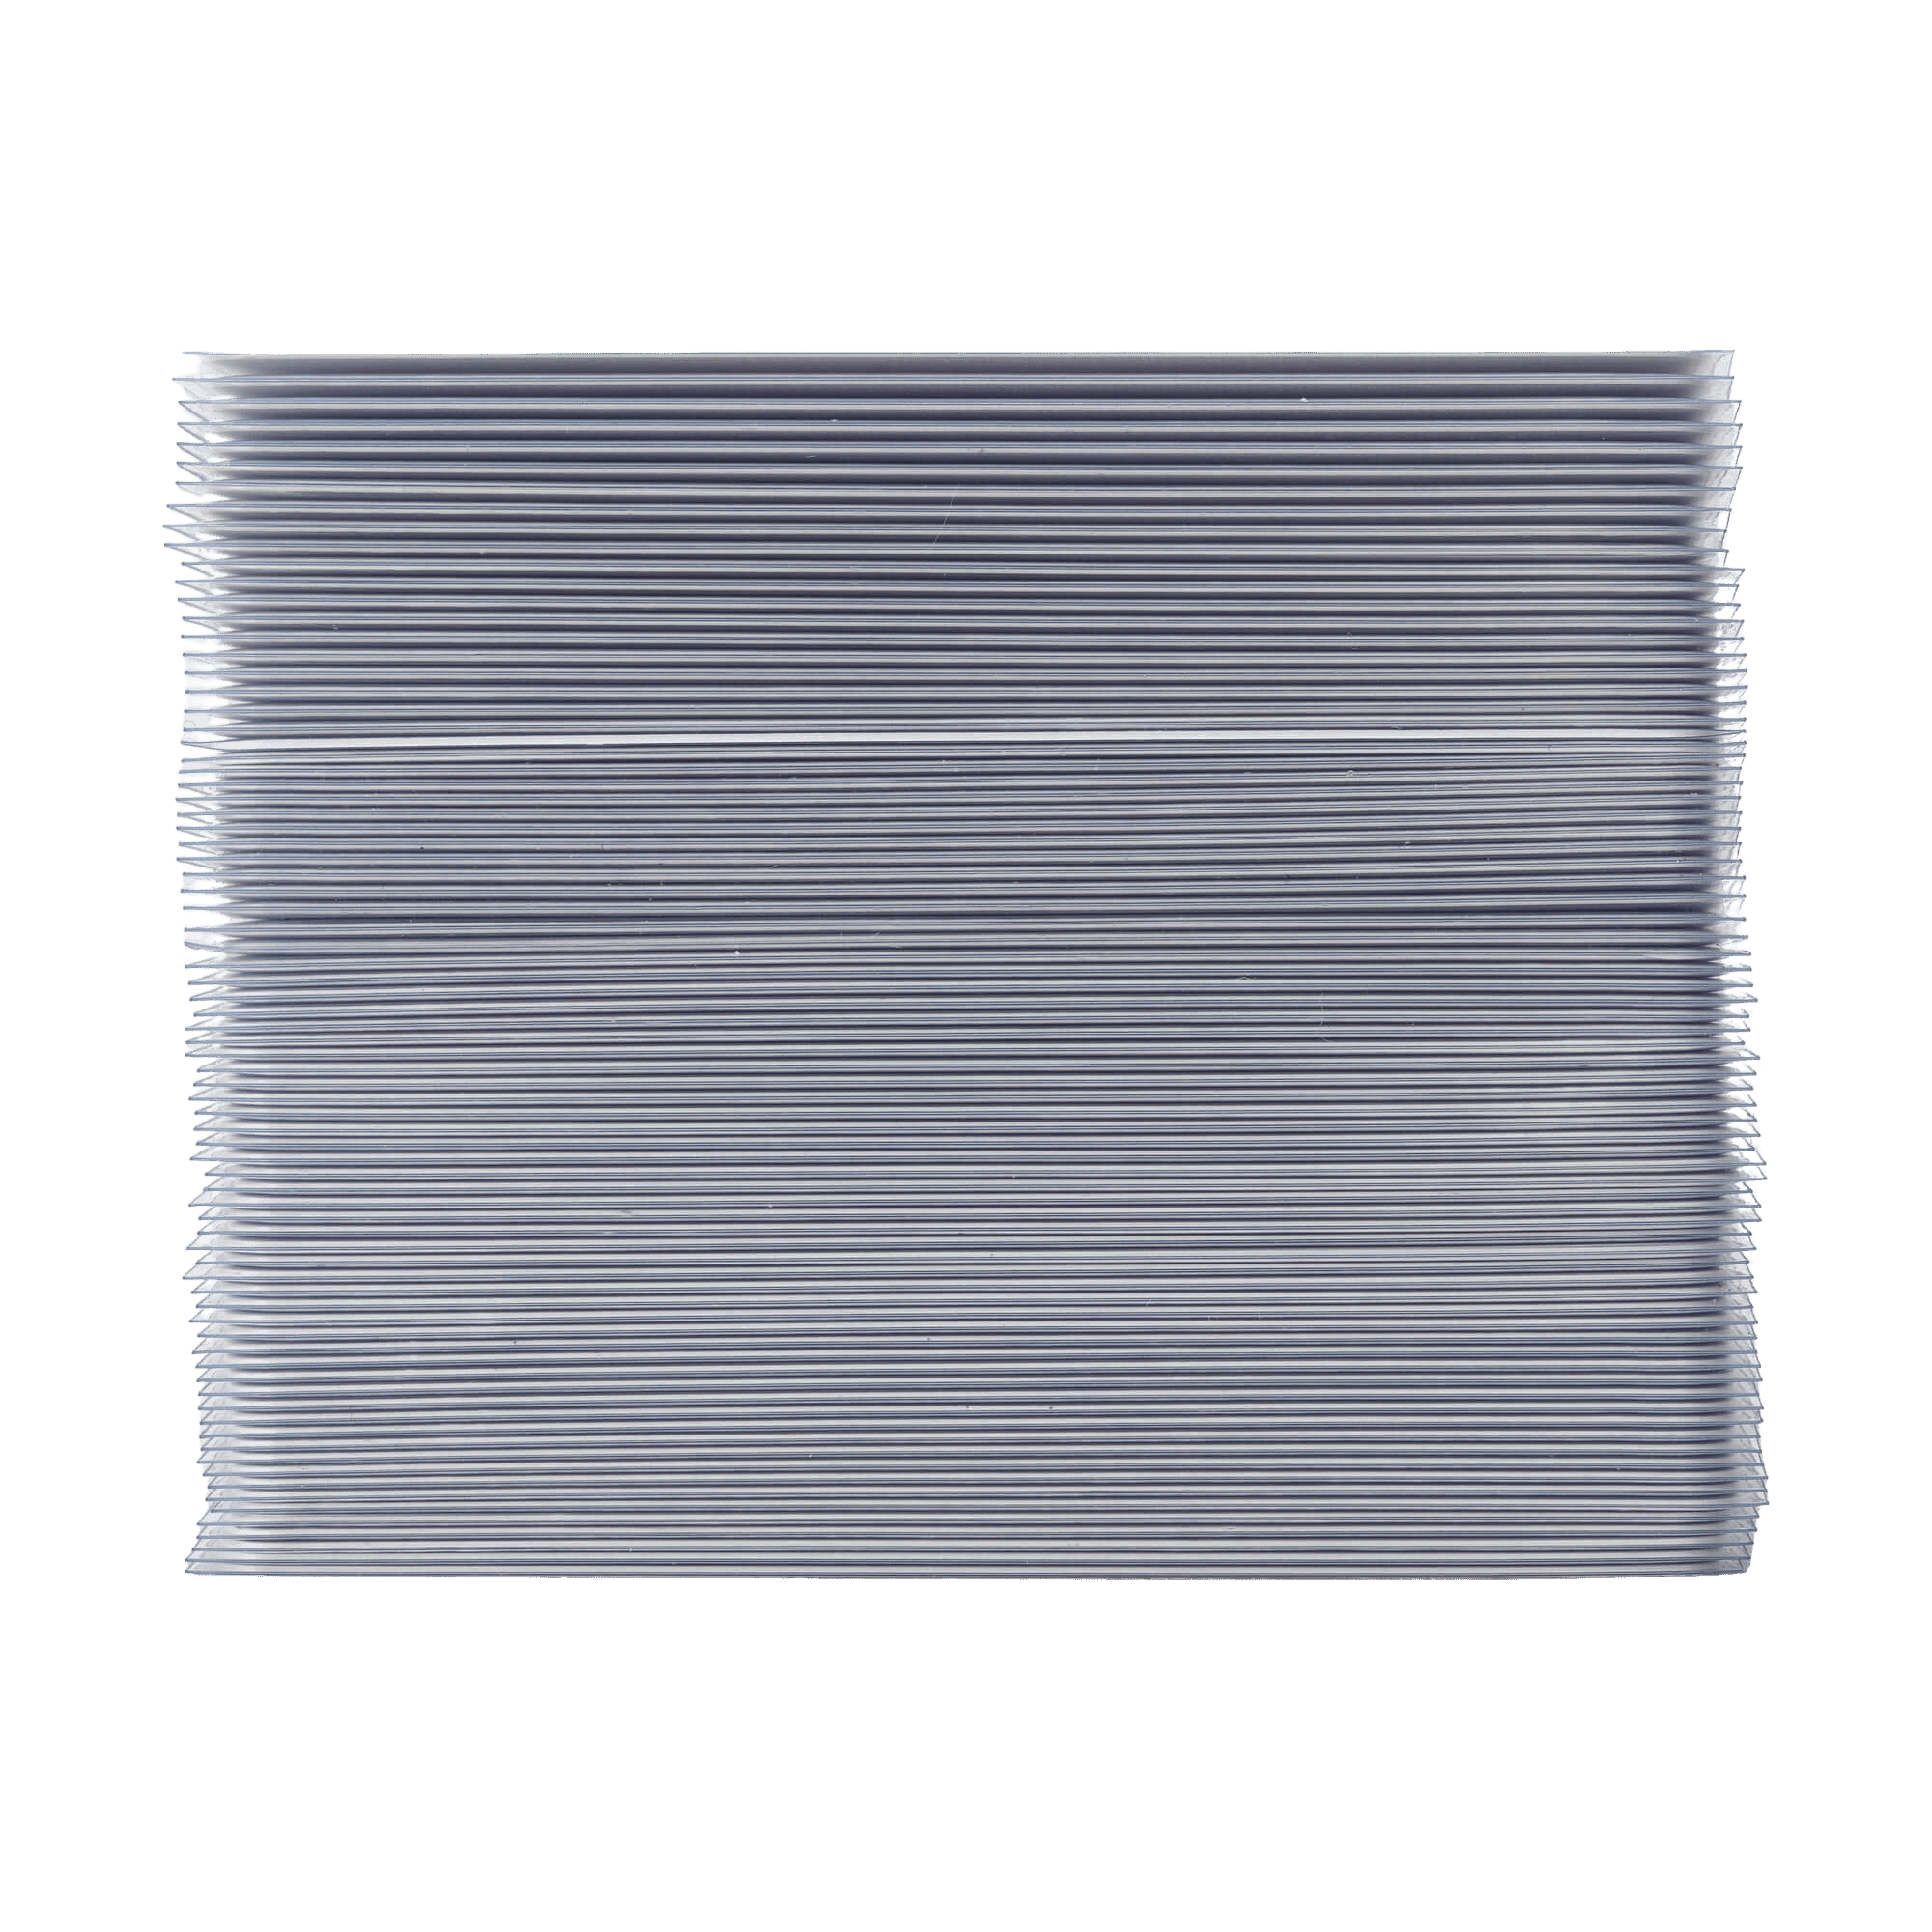 Vault X Exact Fit Card Sleeves (100 Pack) - The Card Vault